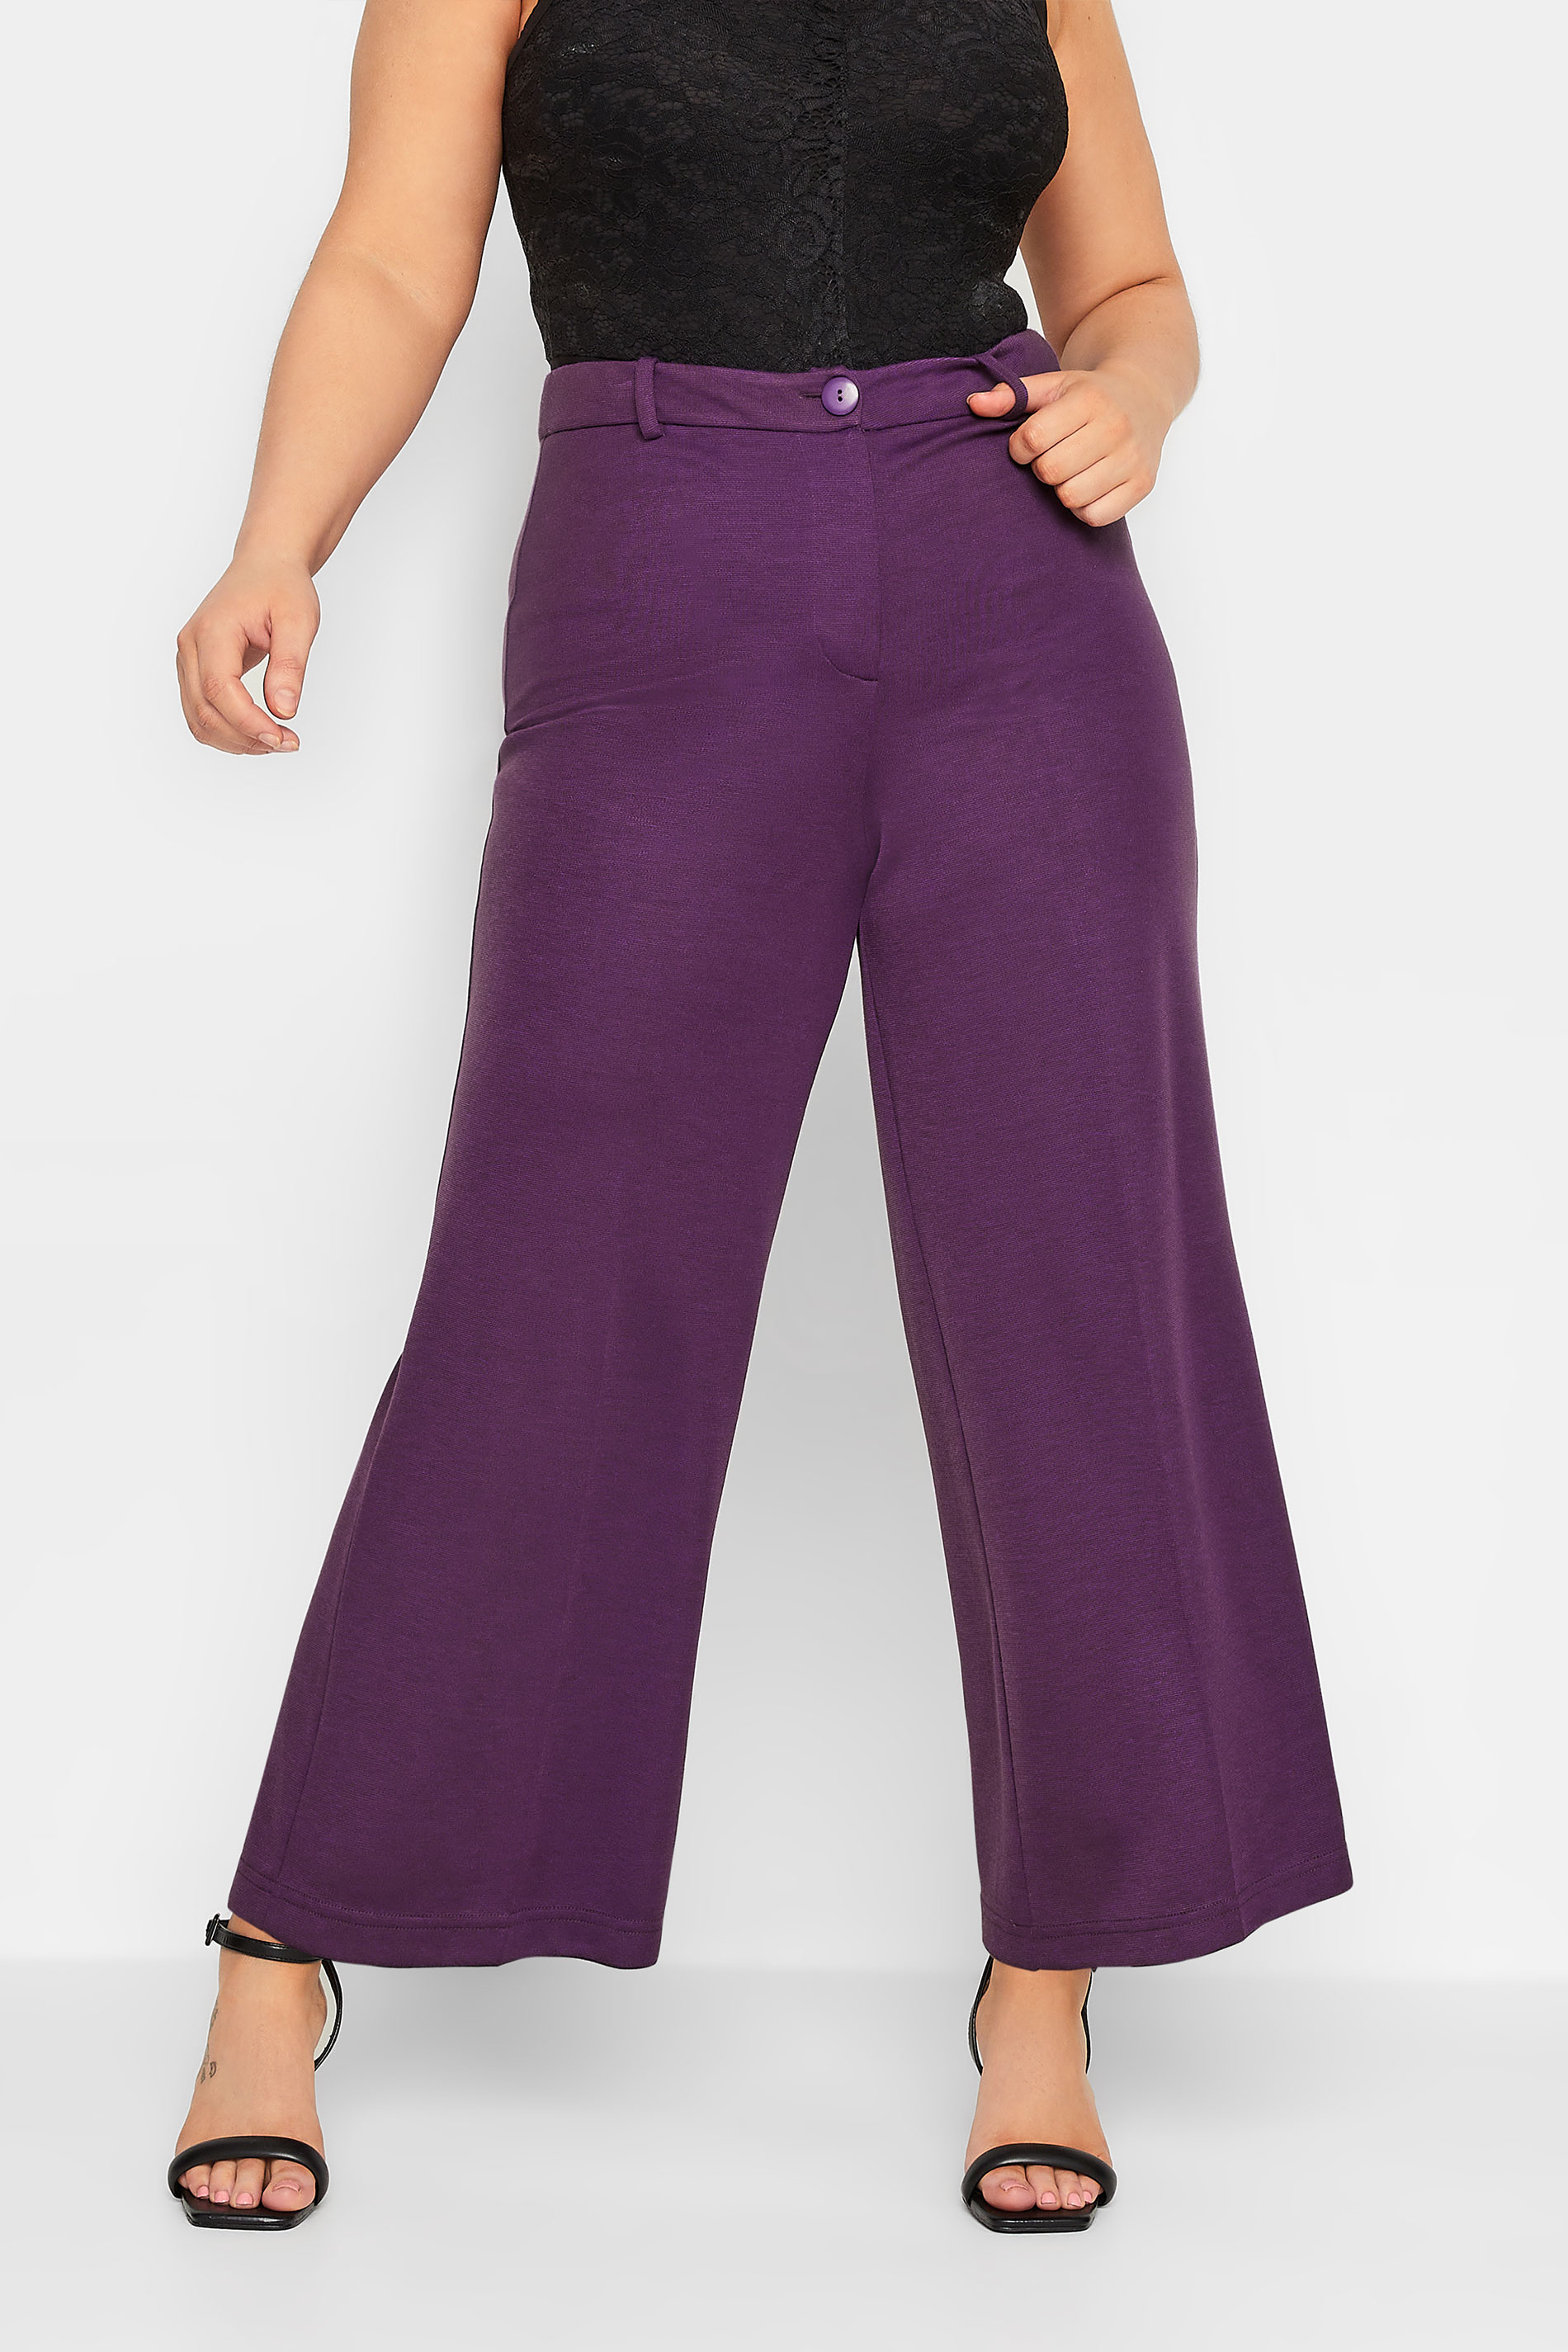 Y.A.S tailored pants in bright purple (part of a set)